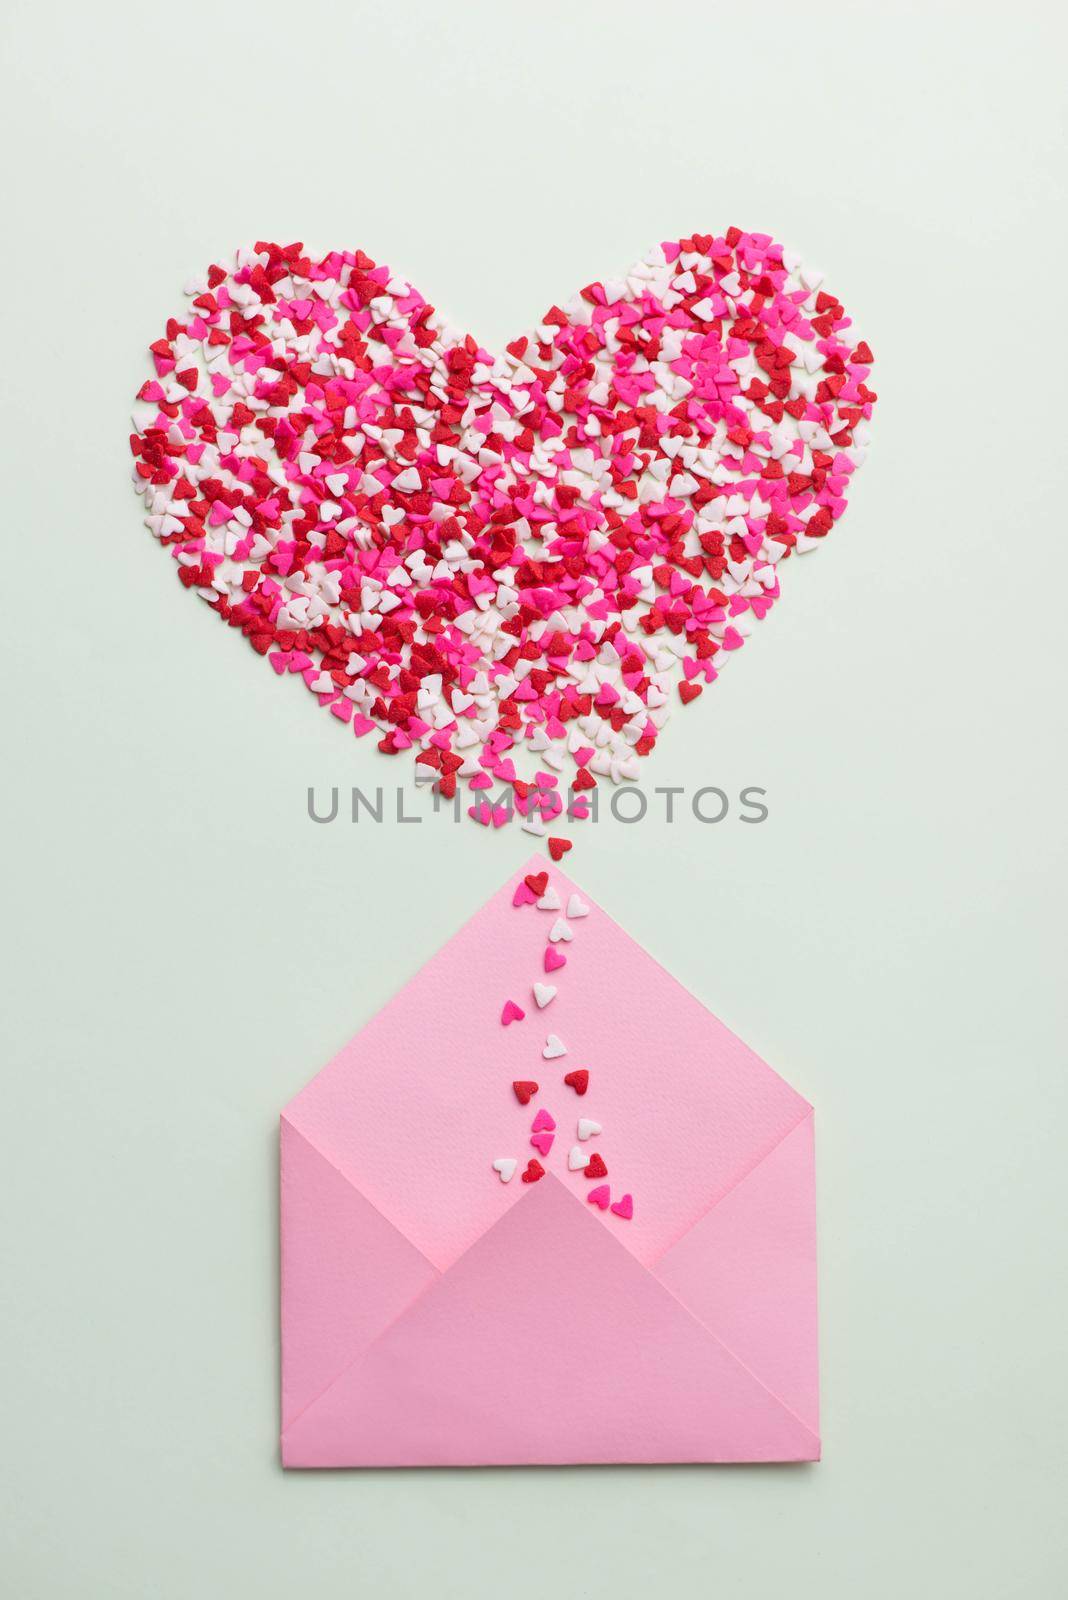 Sweets sugar candy hearts on envelope over green background by makidotvn